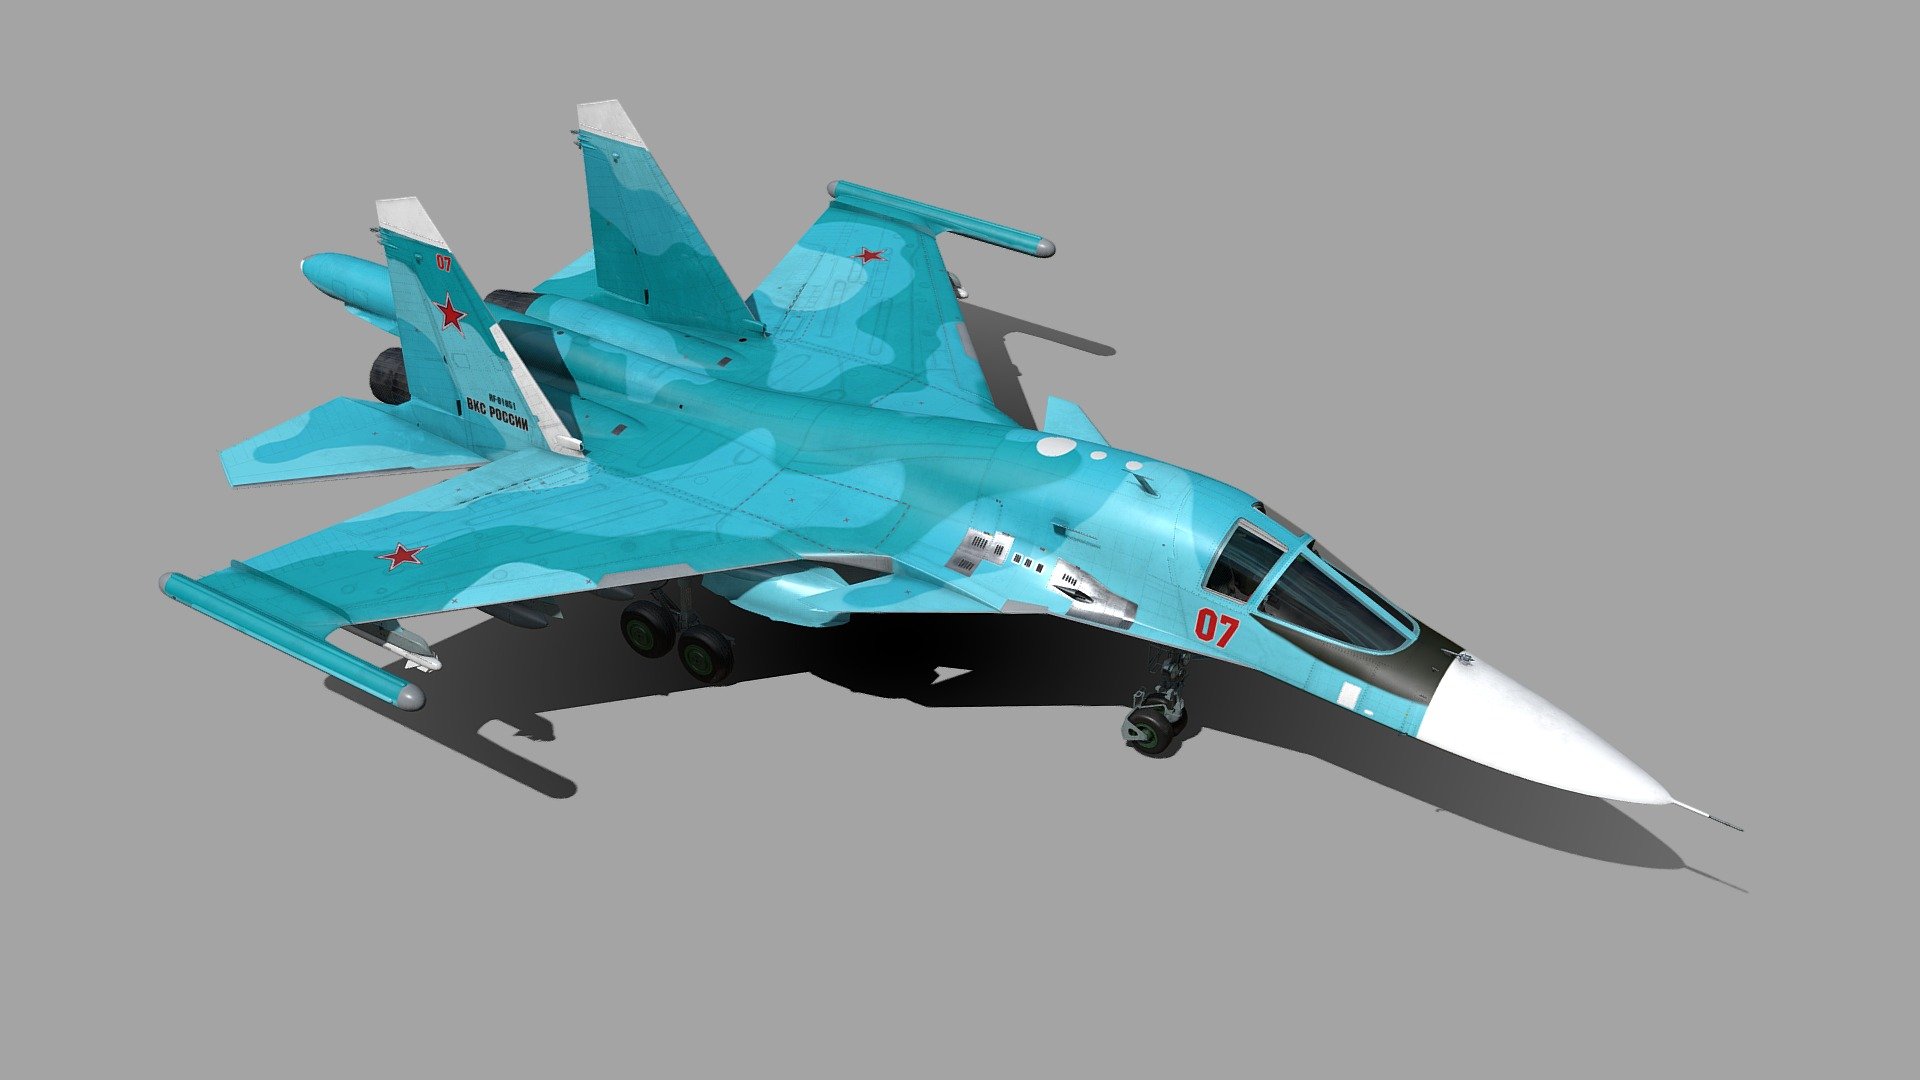 Purchase link is here https://www.artstation.com/artwork/KO39w9

The Sukhoi Su-34 is a Russian twin-engine, twin-seat, all-weather supersonic medium-range fighter-bomber/strike aircraft.It first flew in 1990, and it entered service in 2014 with the Russian Air Force.

Based on the Sukhoi Su-27 Flanker air superiority fighter, the Su-34 has an armoured cockpit for side-by-side seating of its two-person crew. The Su-34 is designed primarily for tactical deployment against ground and naval targets - Sukhoi Su-34 Fullback - Buy Royalty Free 3D model by Tim Samedov (@citizensnip) 3d model